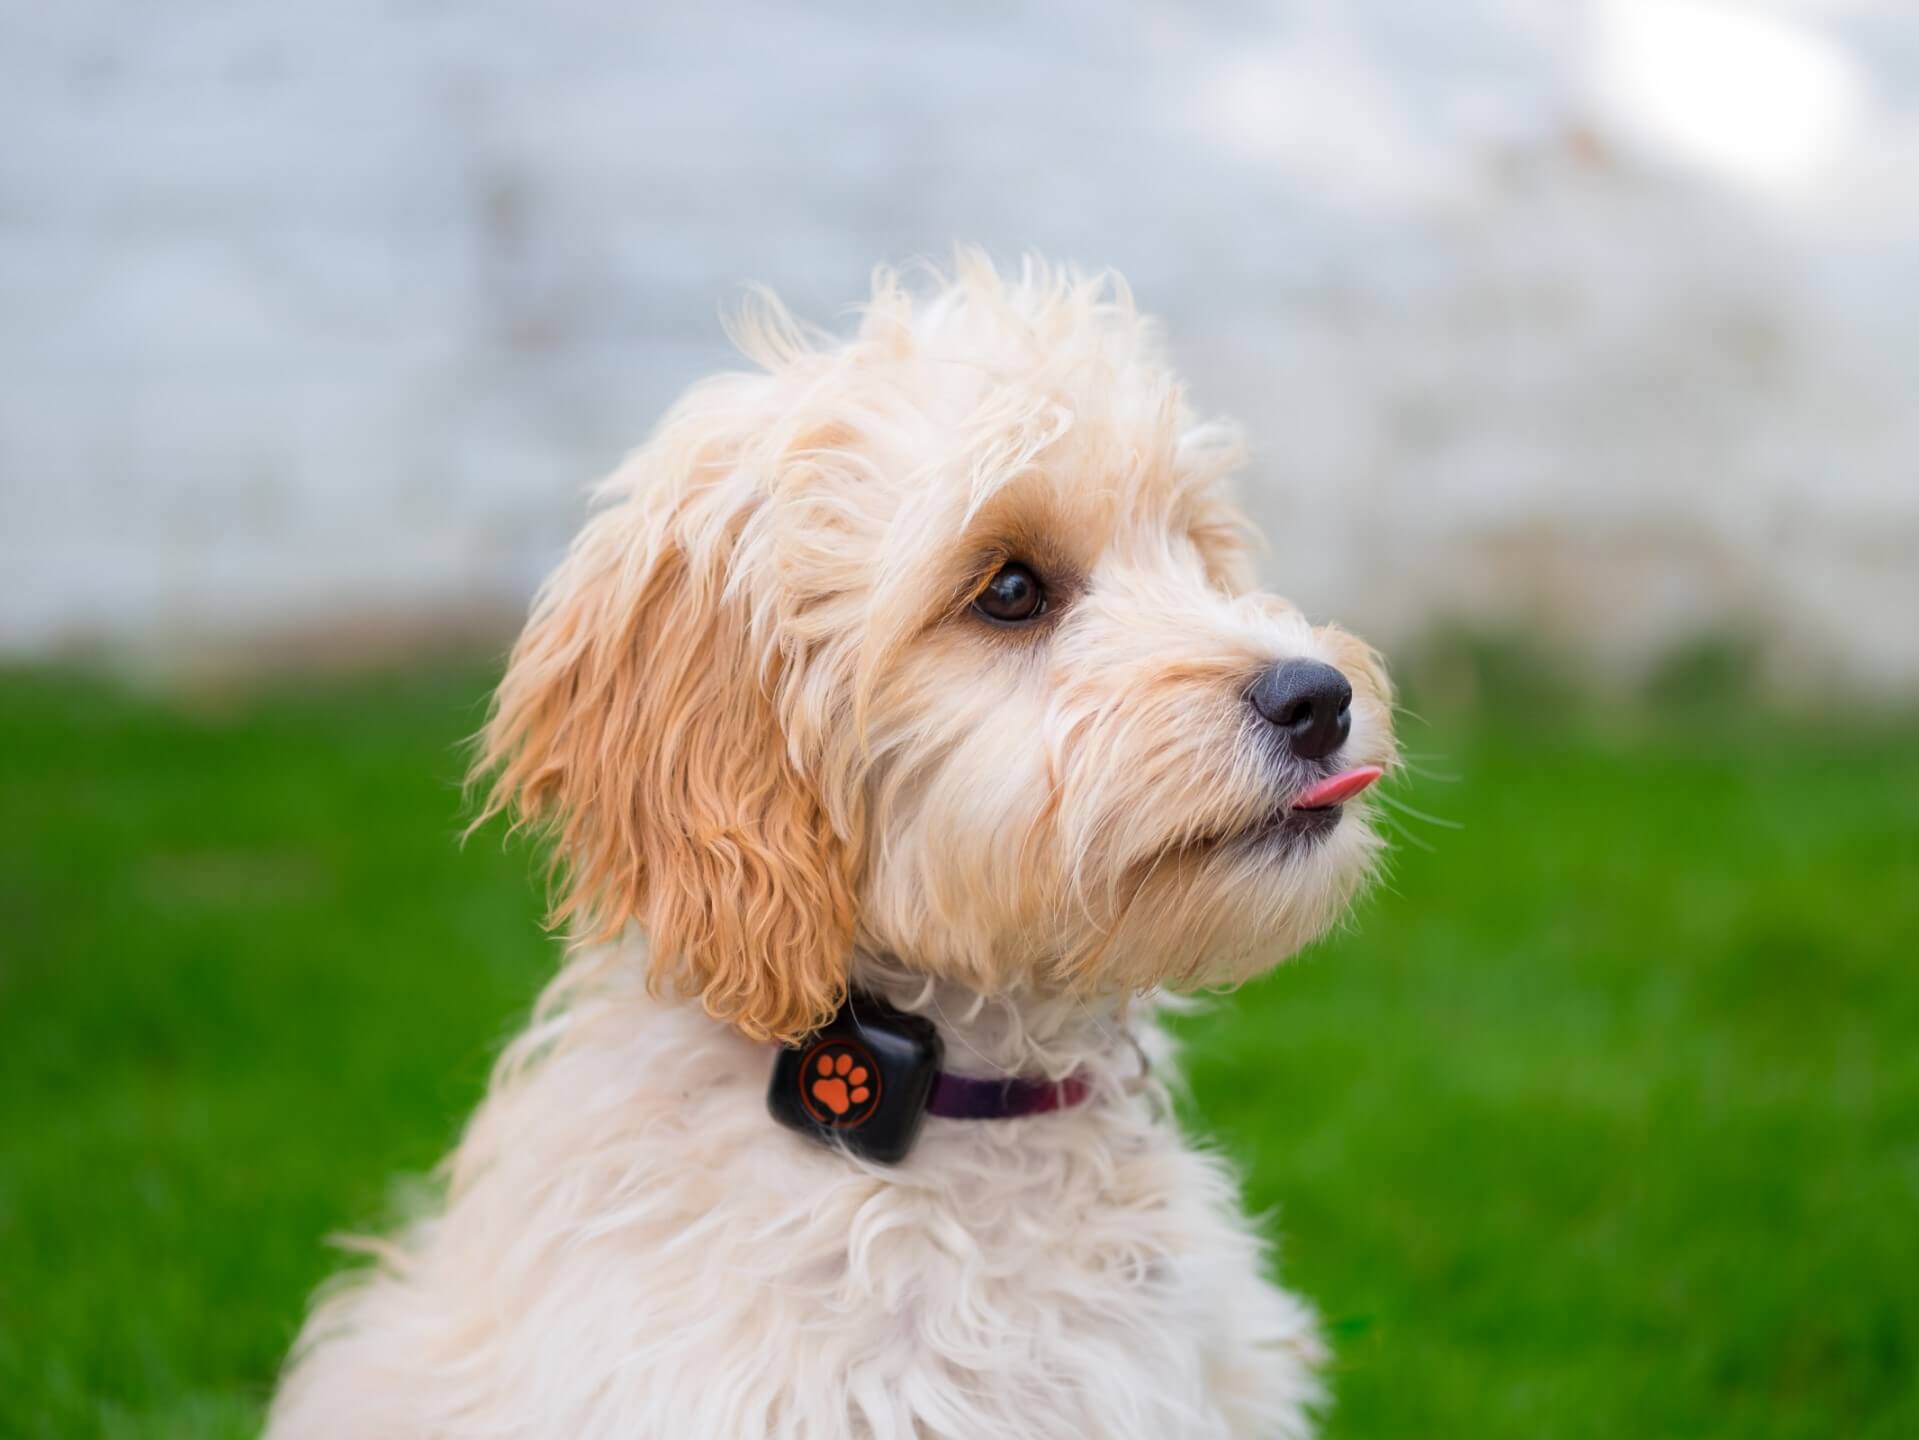 Cockapoo with tongue sticking out